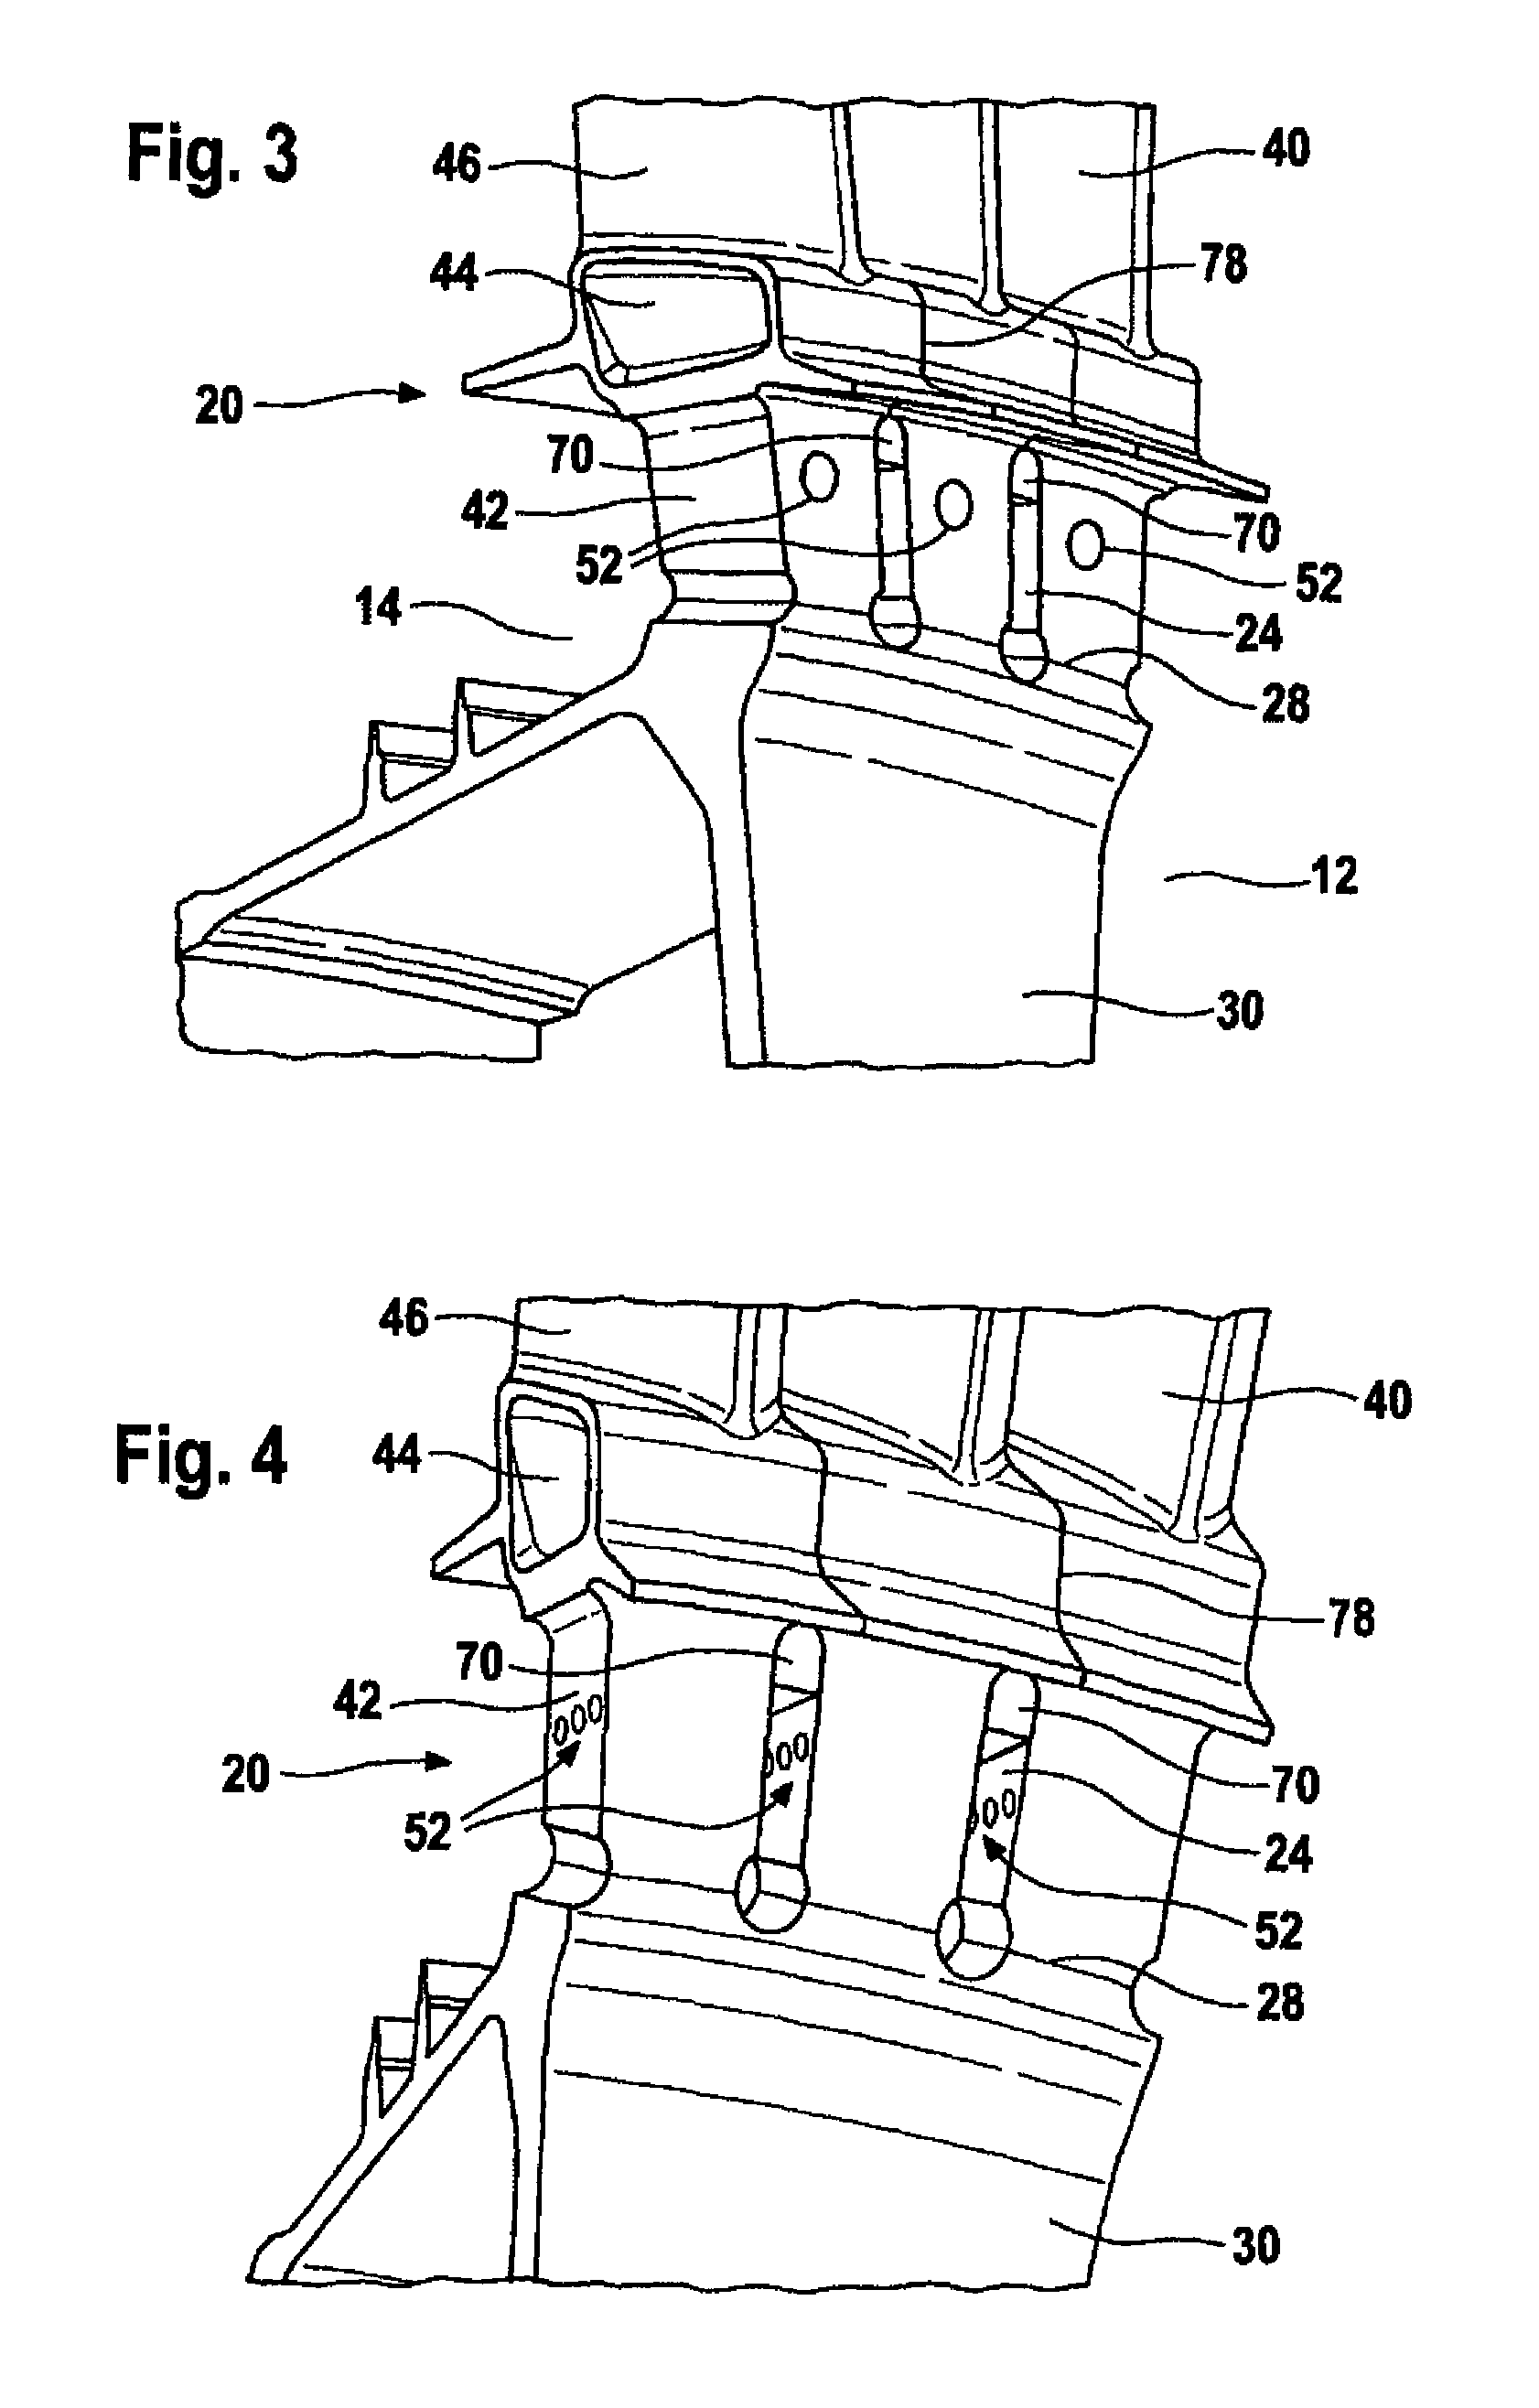 Integrally bladed rotor disk for a turbine